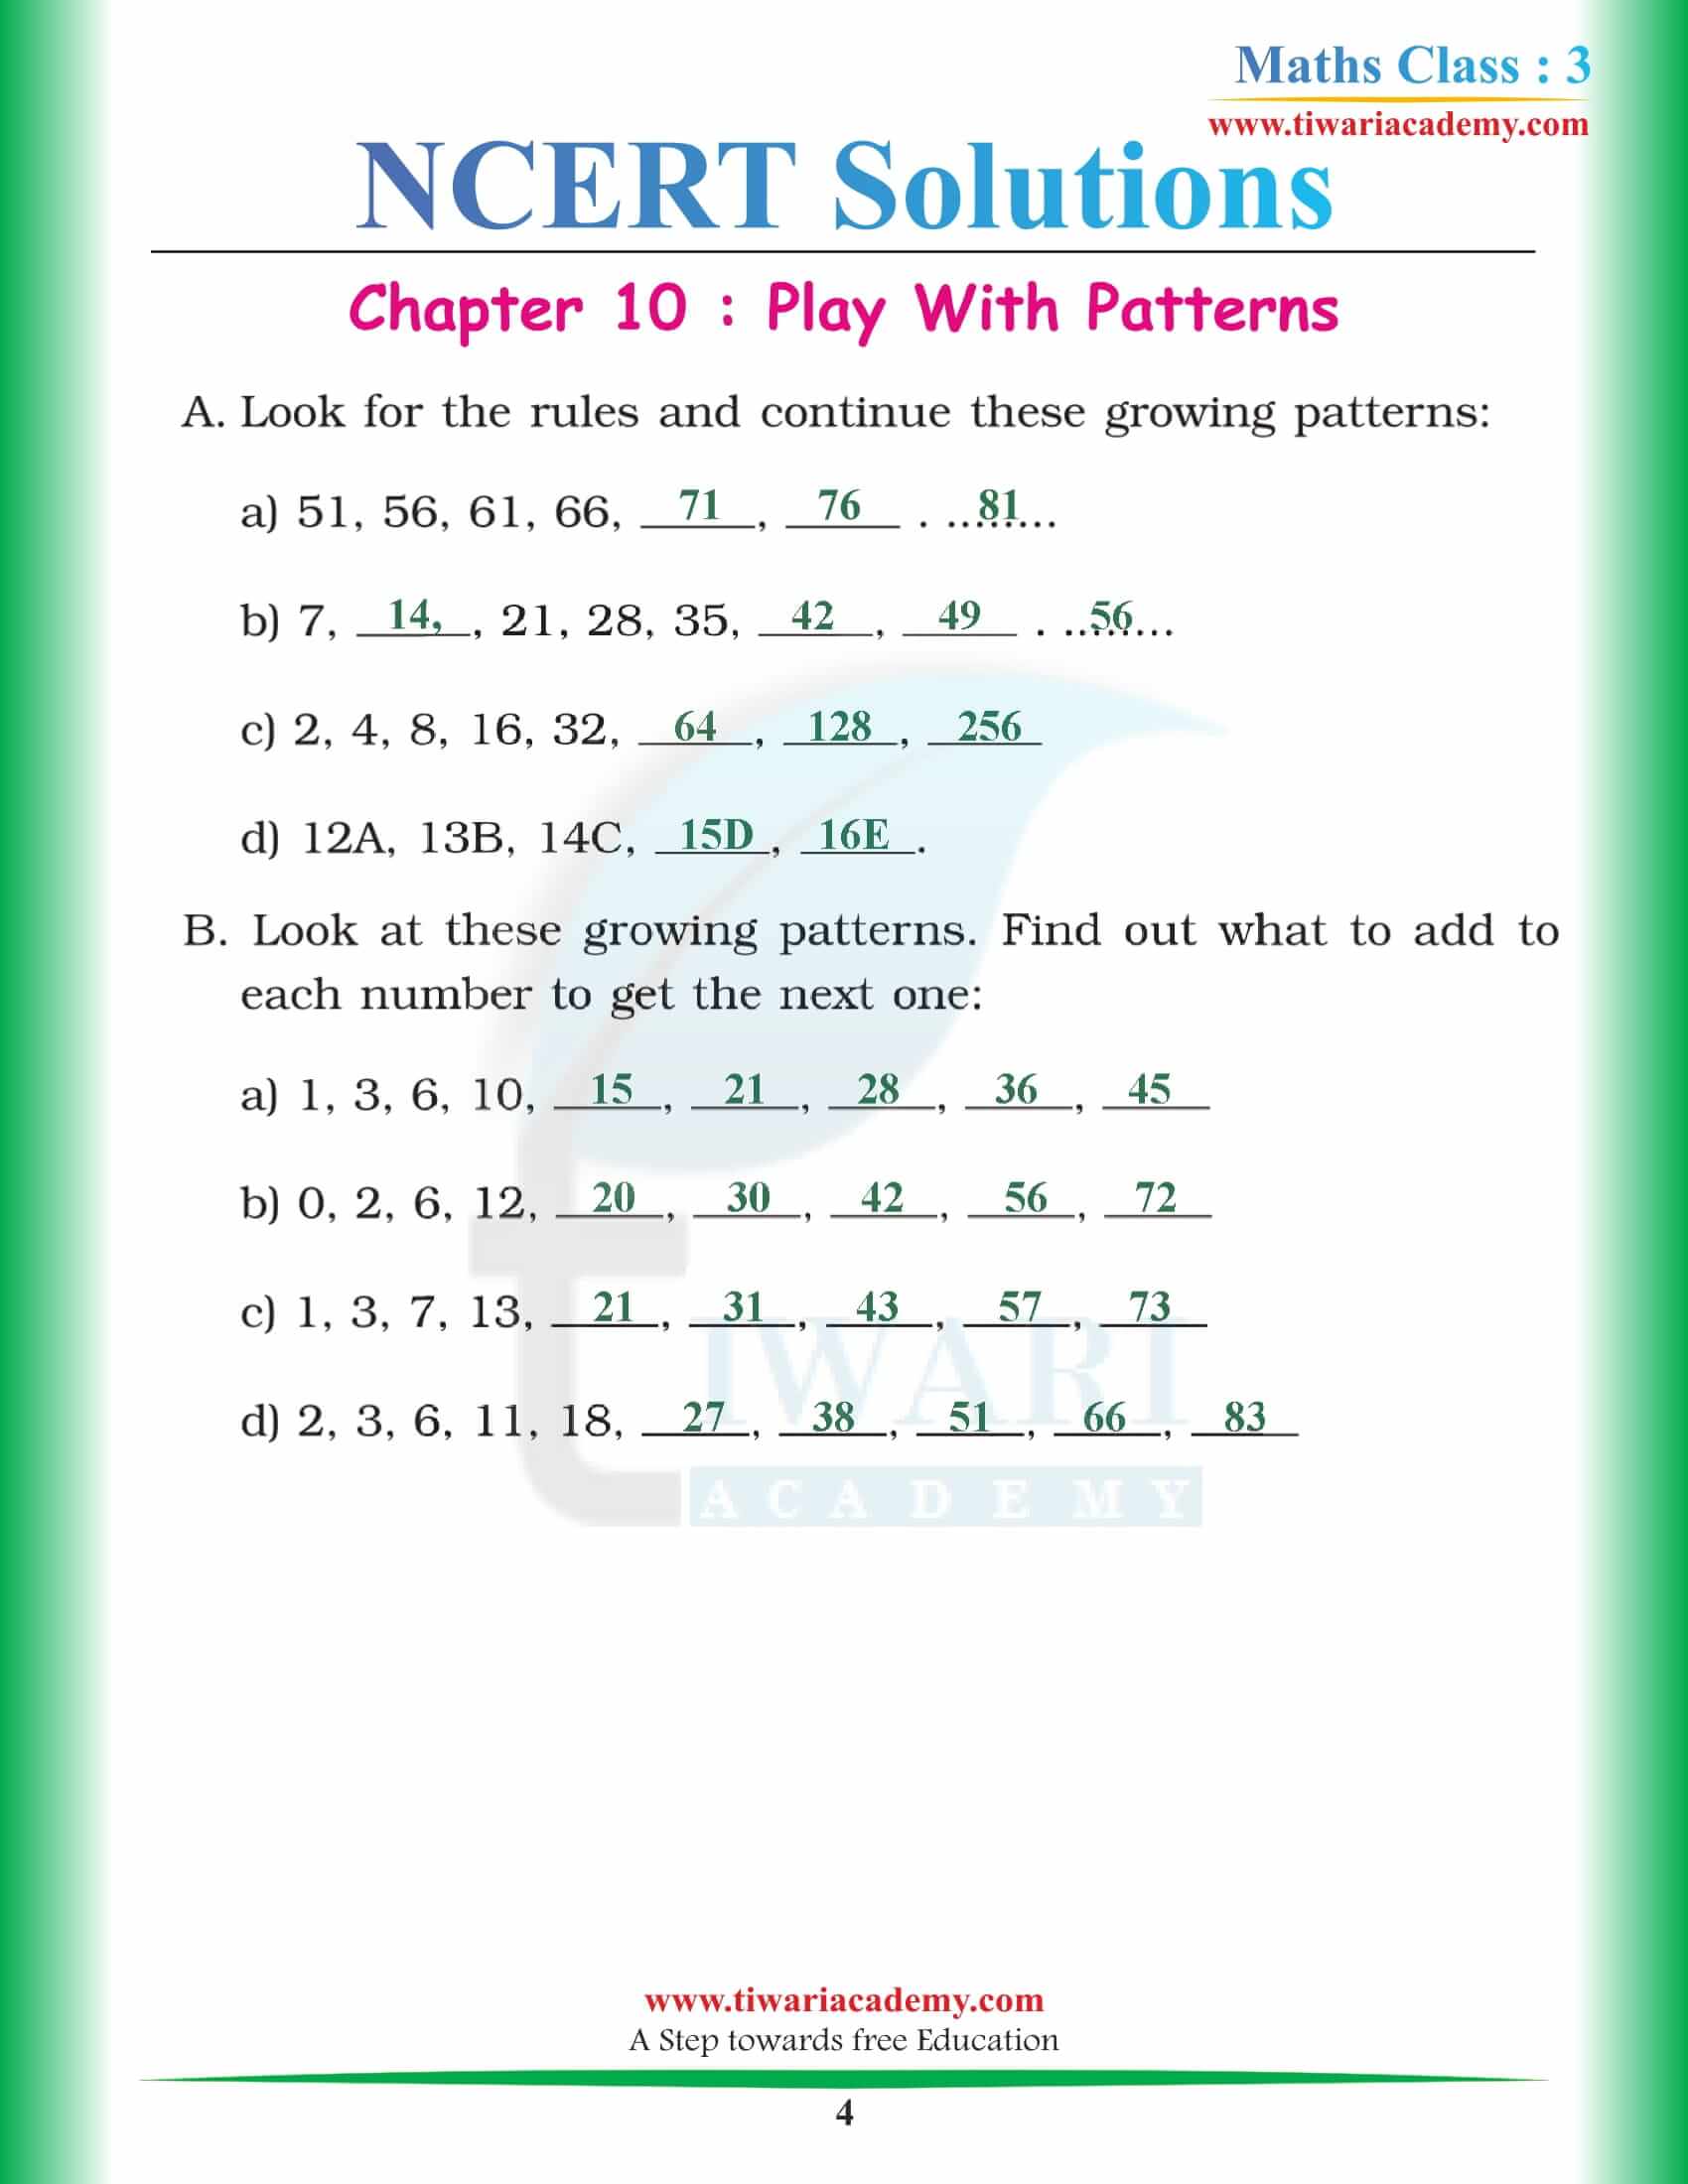 NCERT Solutions for Class 3 Maths Chapter 10 in English Medium